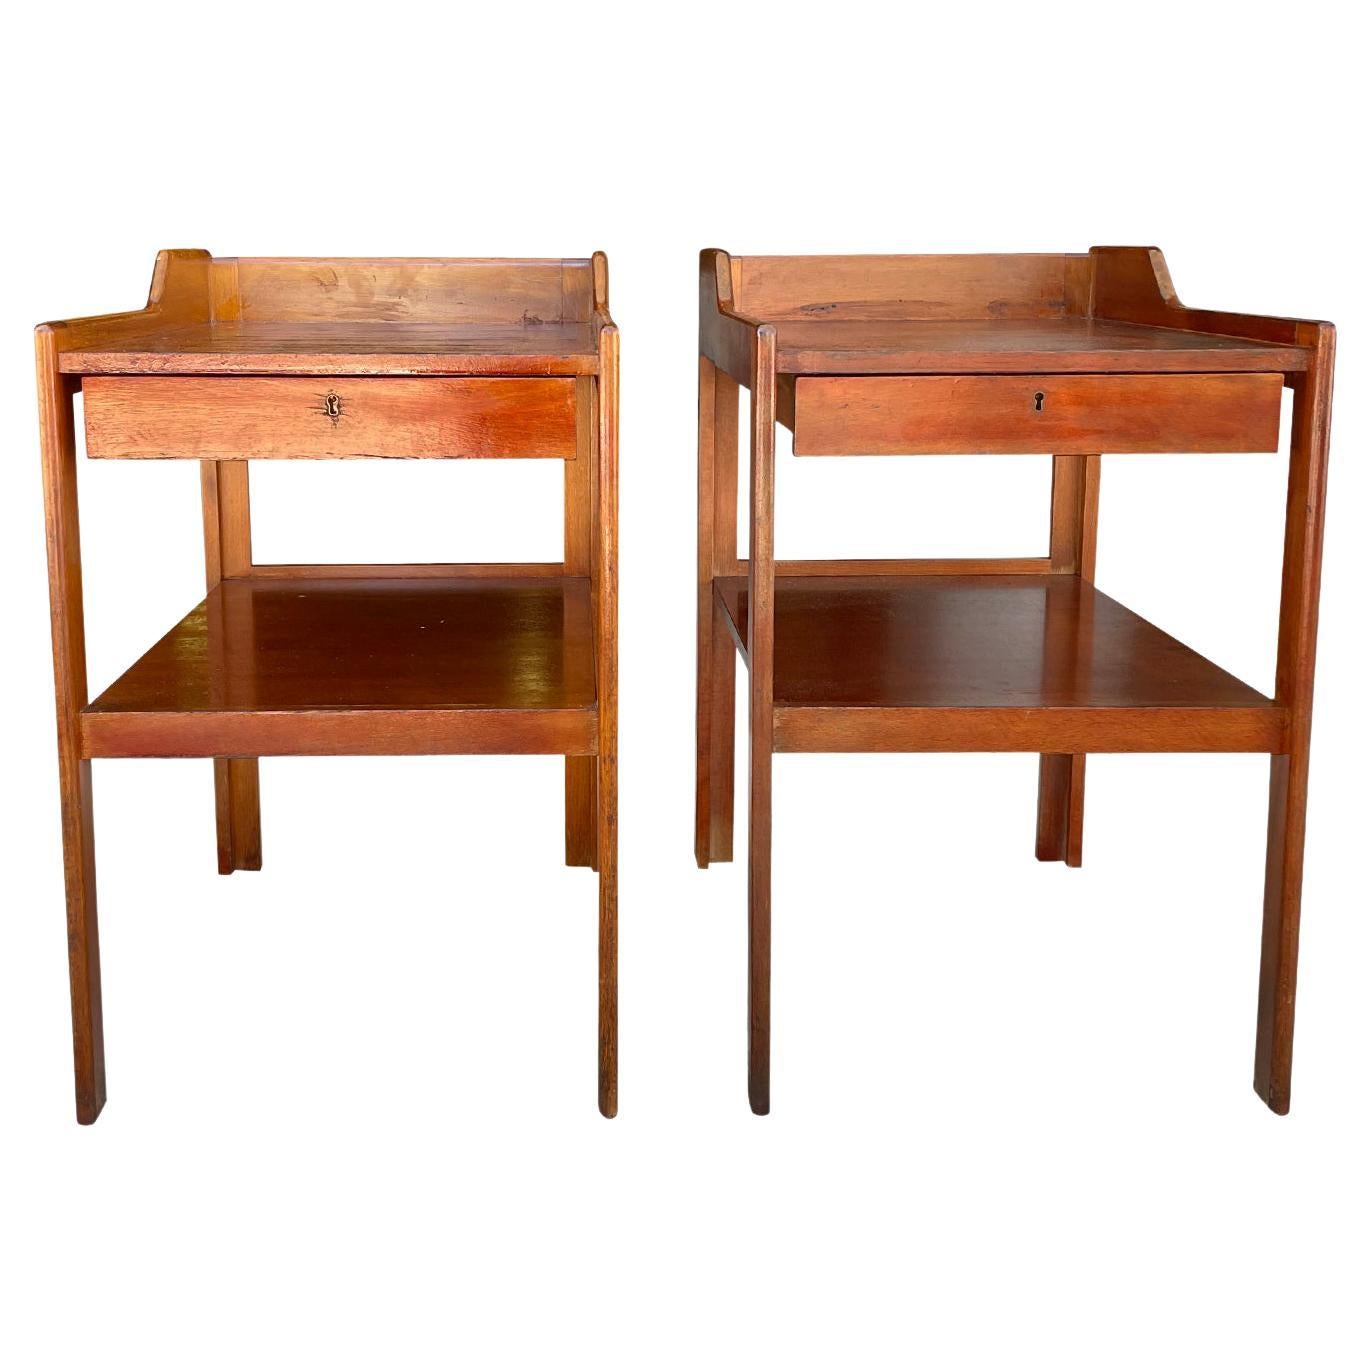 20th Century Swedish Mahogany Nightstands, Bedside Tables by Carl-Axel Acking